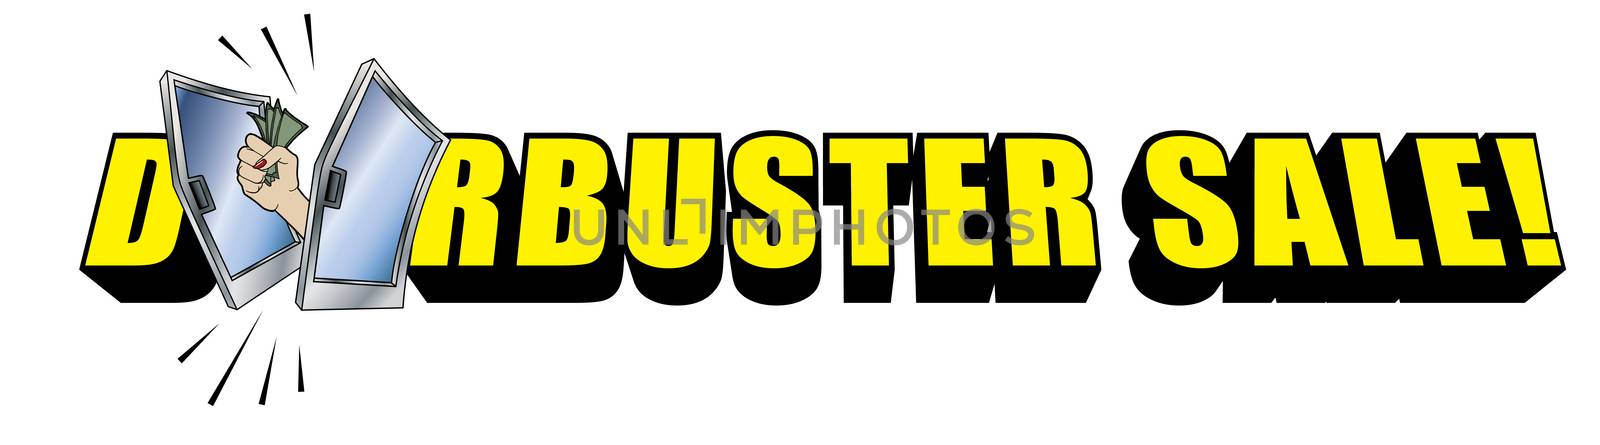 Doorbuster Sale Copy Logo on White Background